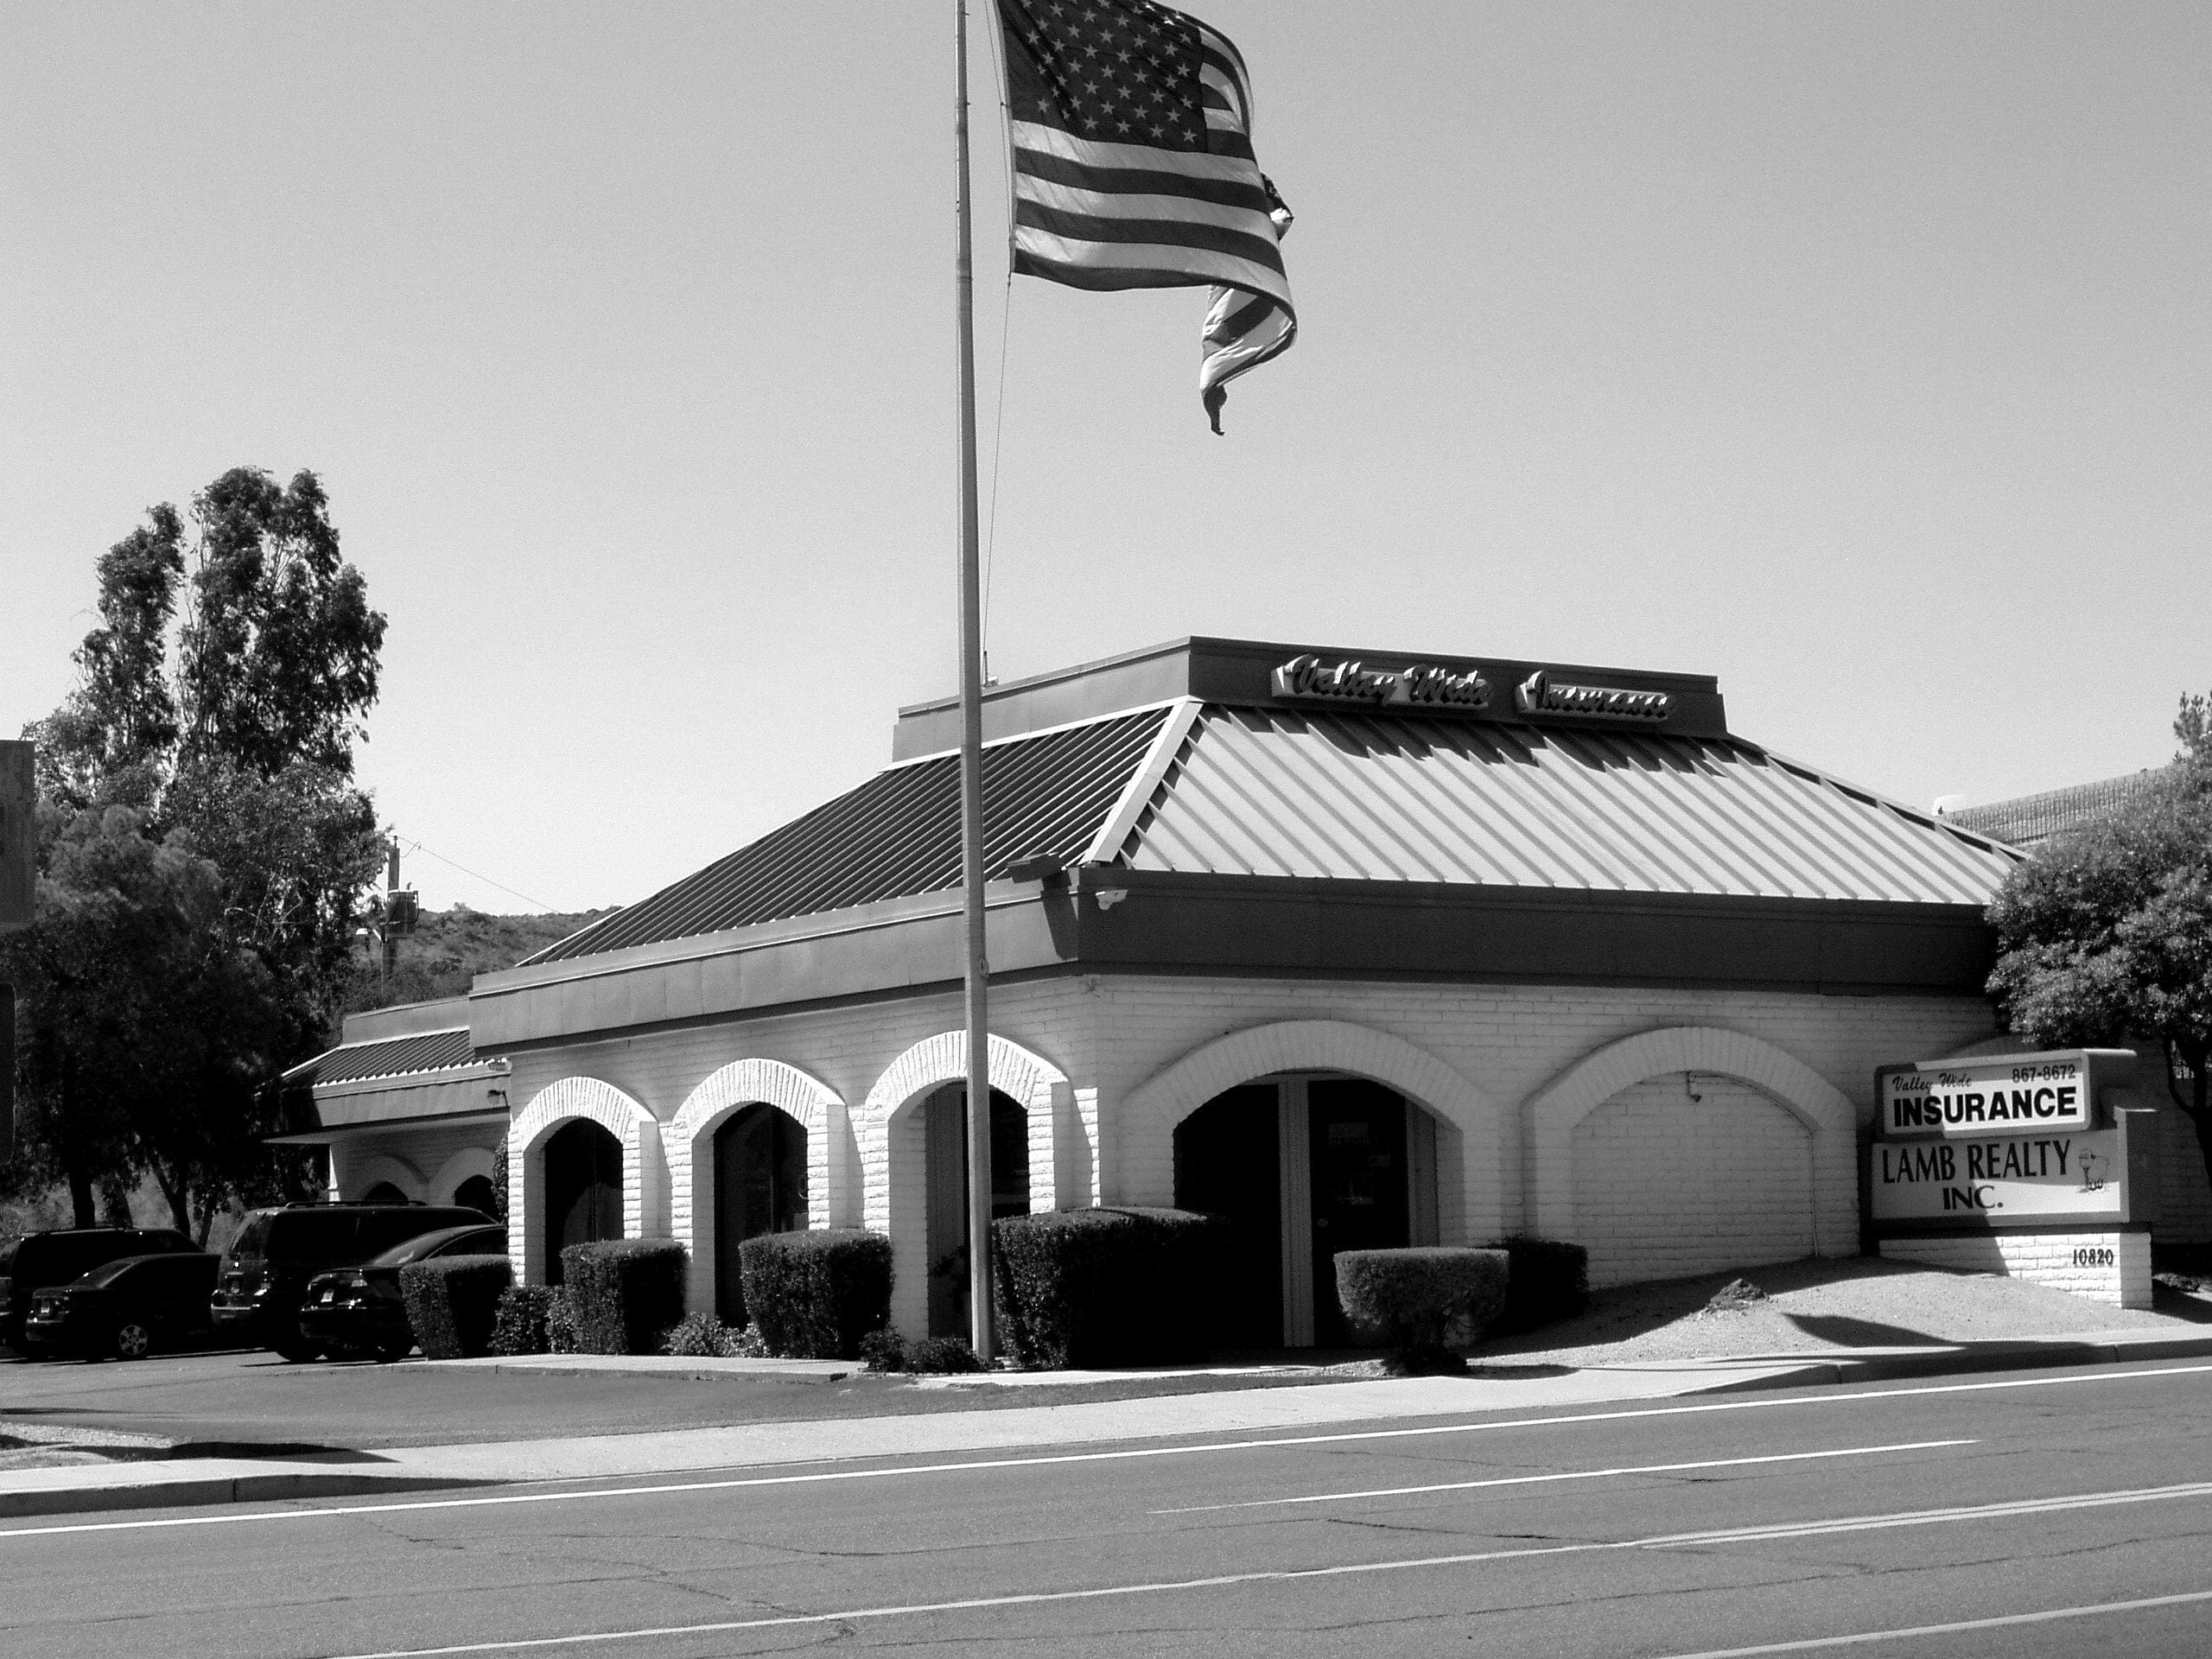 A monochrome photo of a single-story commercial building with an american flag flying overhead, and signs indicating the presence of an insurance and realty business, about Sun Valley Construction.